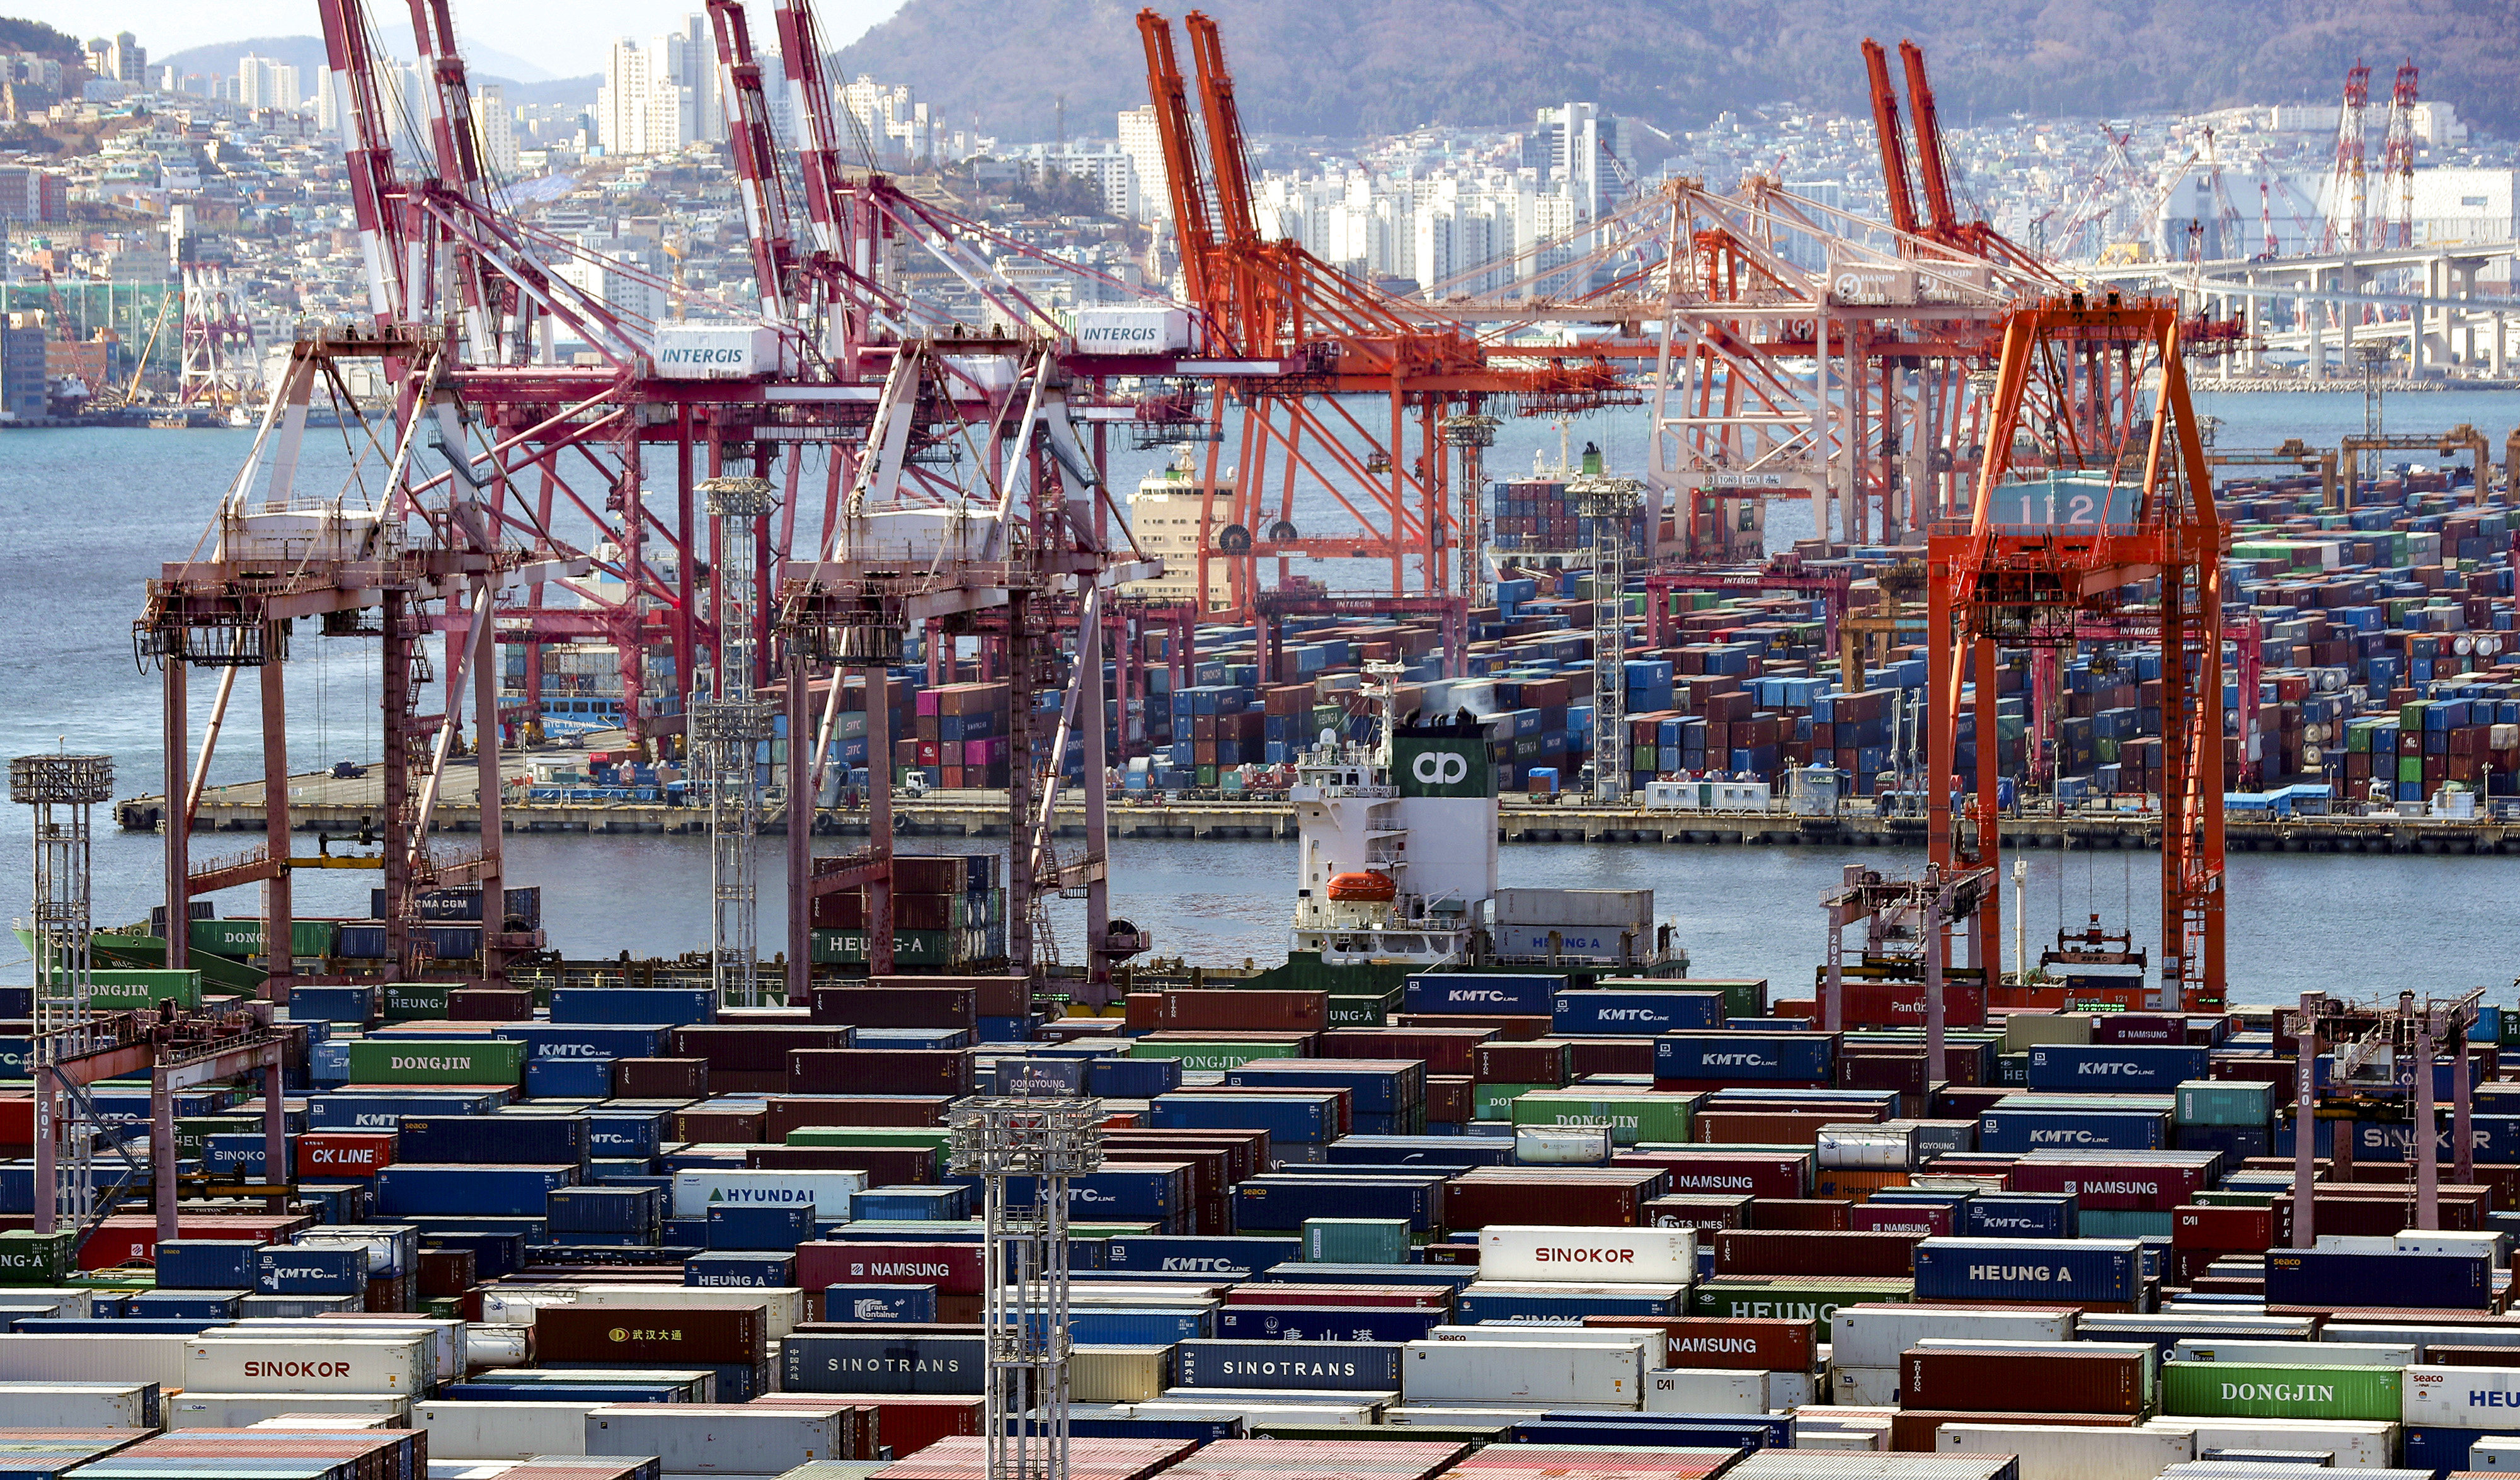 Containers are seen at South Korea’s largest port in Busan. South Korea was Shandong’s fourth largest trading partner in 2021. Photo: AP